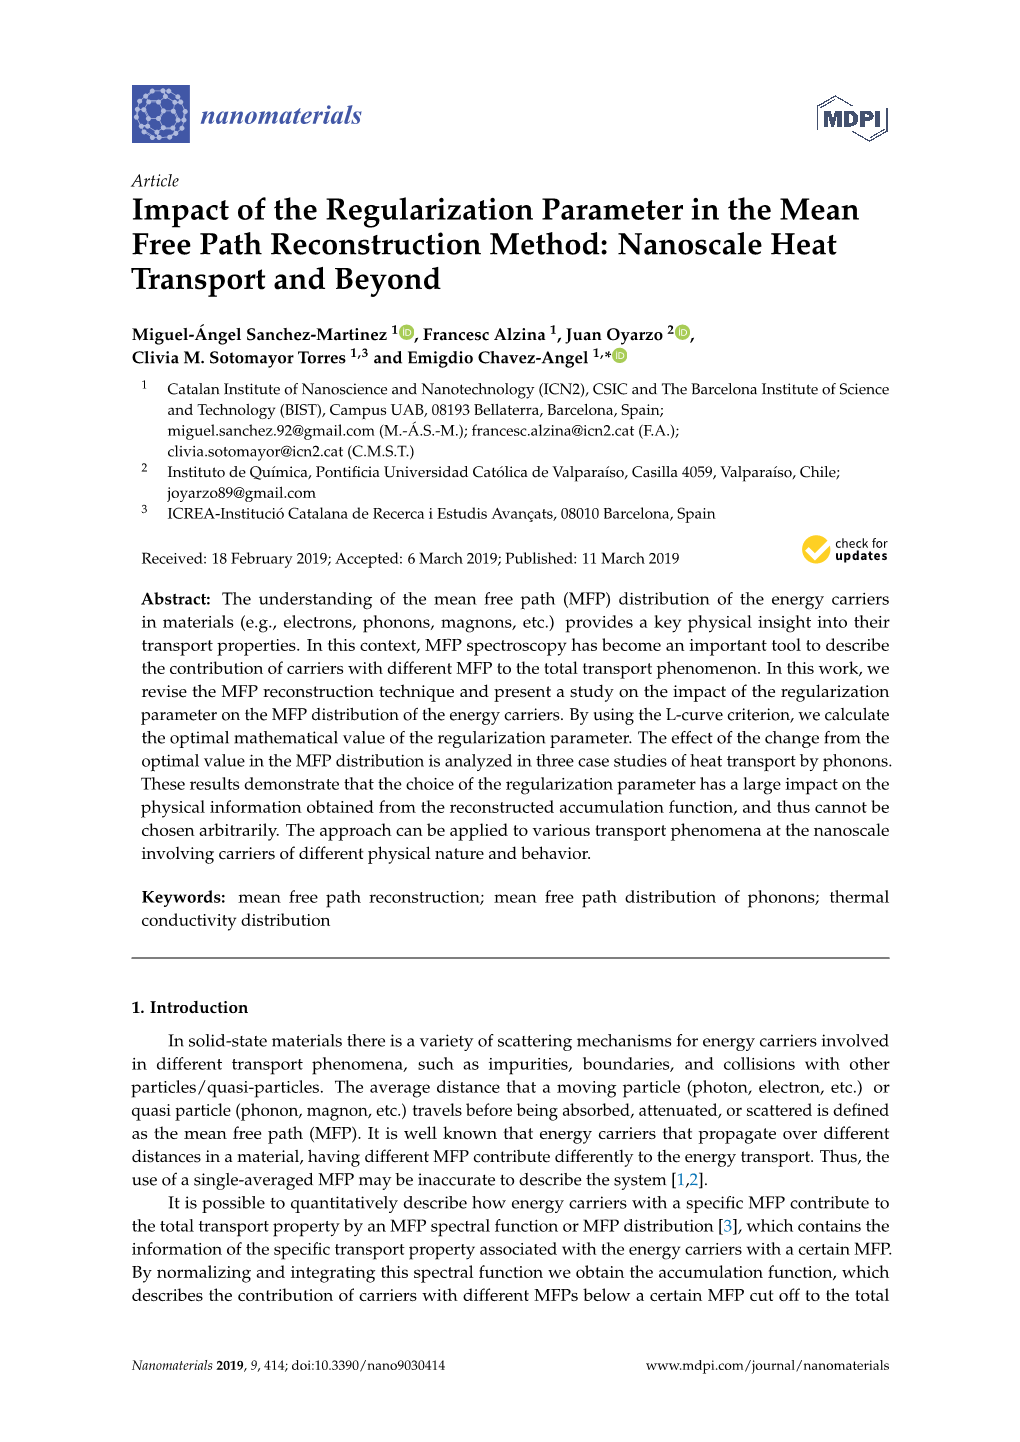 Impact of the Regularization Parameter in the Mean Free Path Reconstruction Method: Nanoscale Heat Transport and Beyond